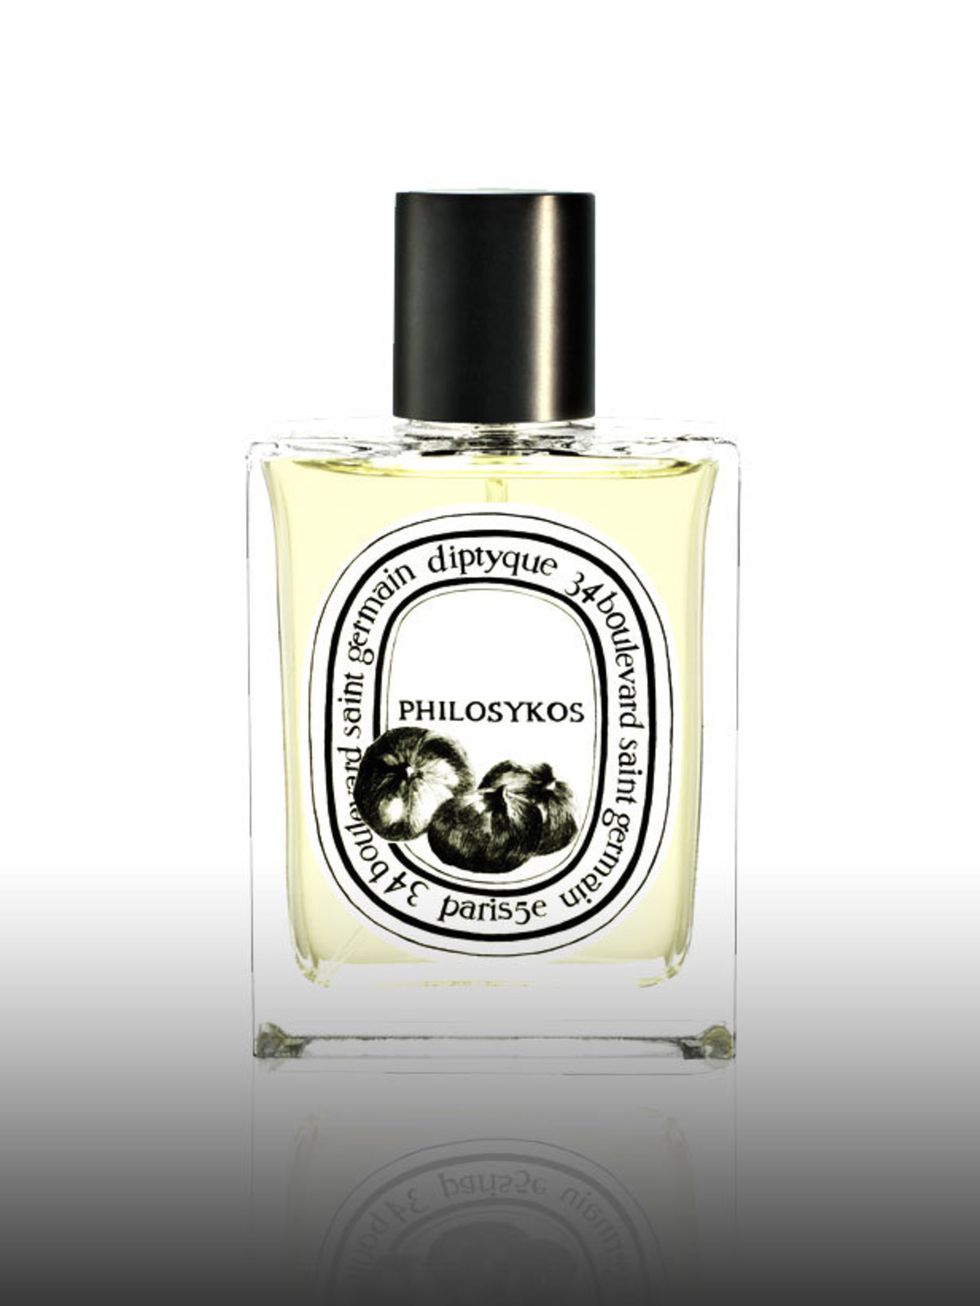 <p>Philosykos Eau de Toilette, £54 for 100ml by Diptyque at <a href="http://www.spacenk.co.uk/ProductDetails.aspx?pid=0025%2F3327%2F13627%2F&amp;cid=B0025FRAGRA&amp;language=en-GB">Space NK</a> </p><p>This fig scented fragrance is a favourite of Alexa's. 